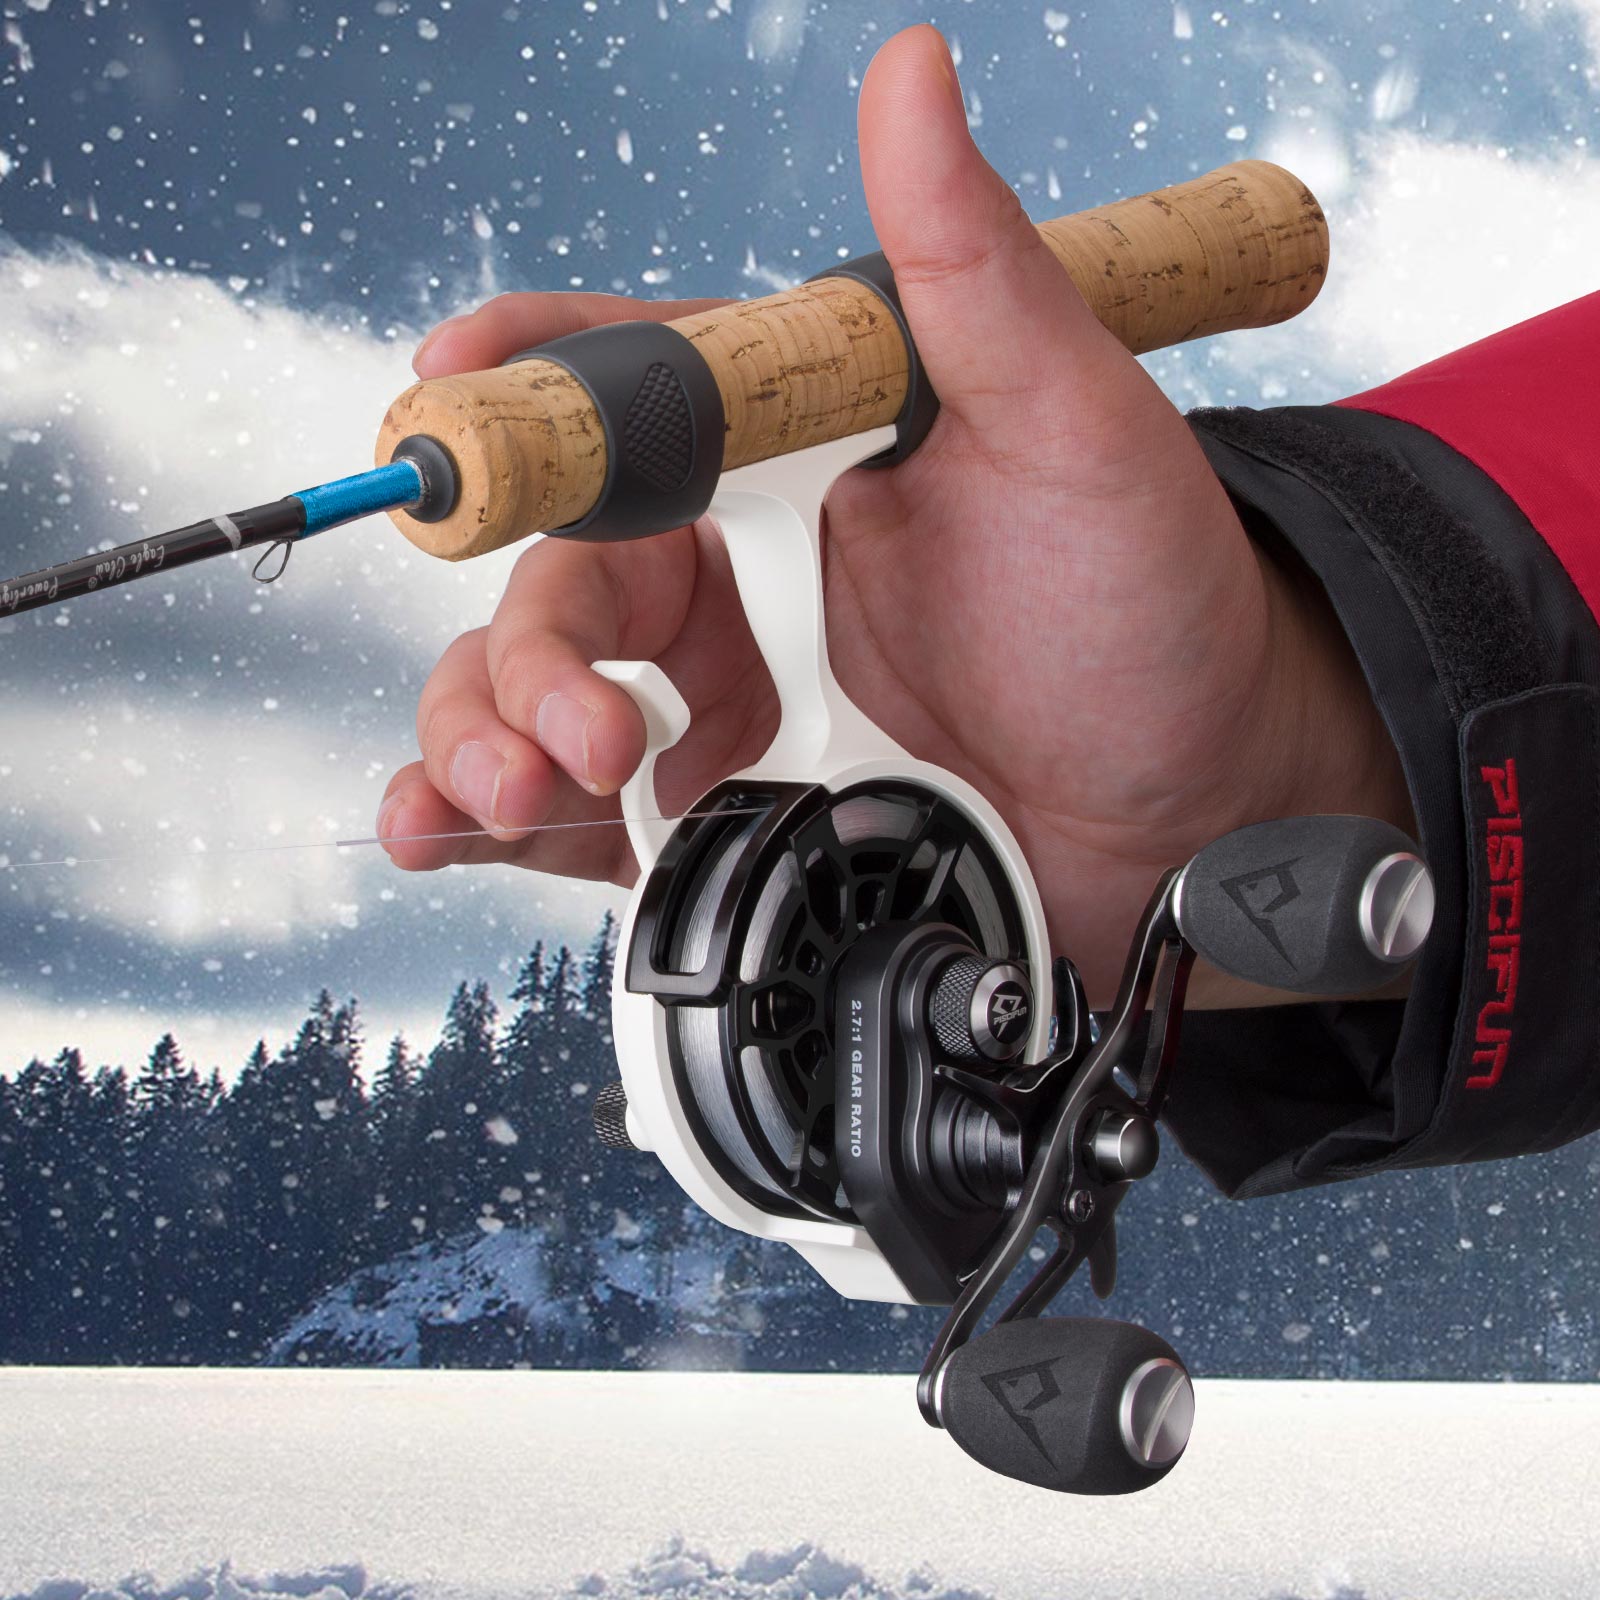 PISCIFUN ICX Inline Ice reel. On Ice Review. 